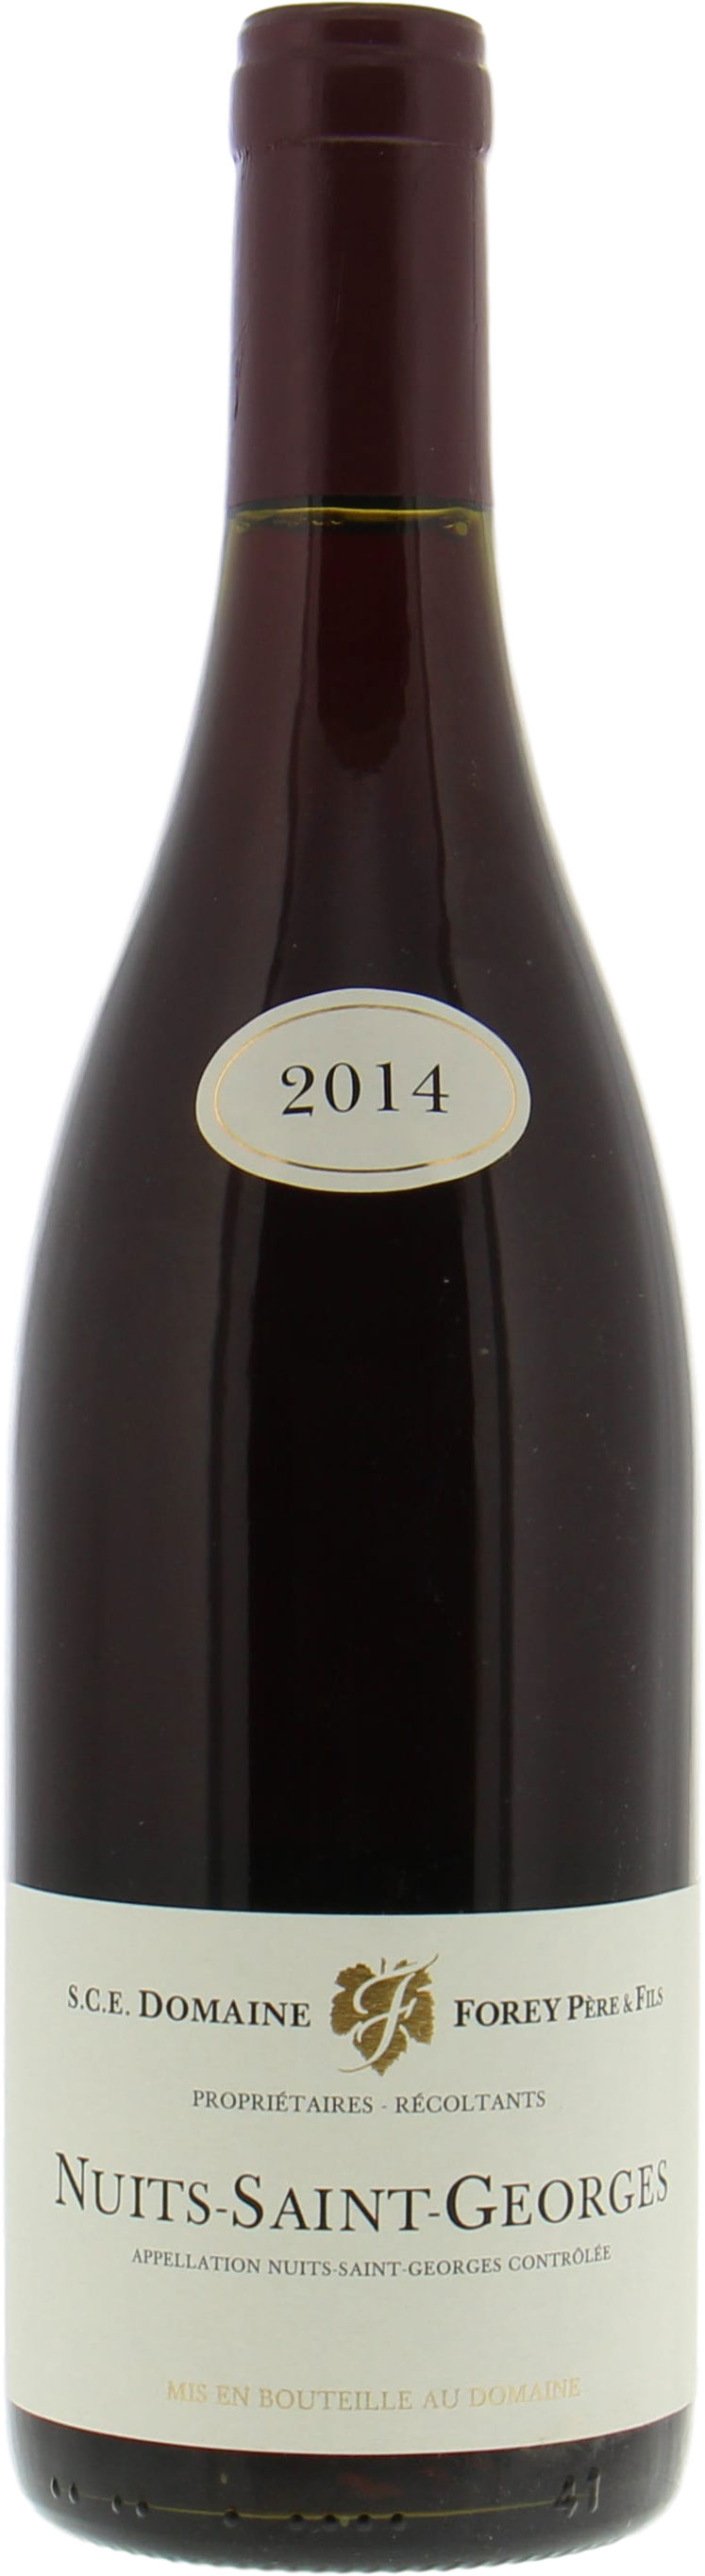 Domaine Forey Pere & Fils - Nuits St. Georges 2014